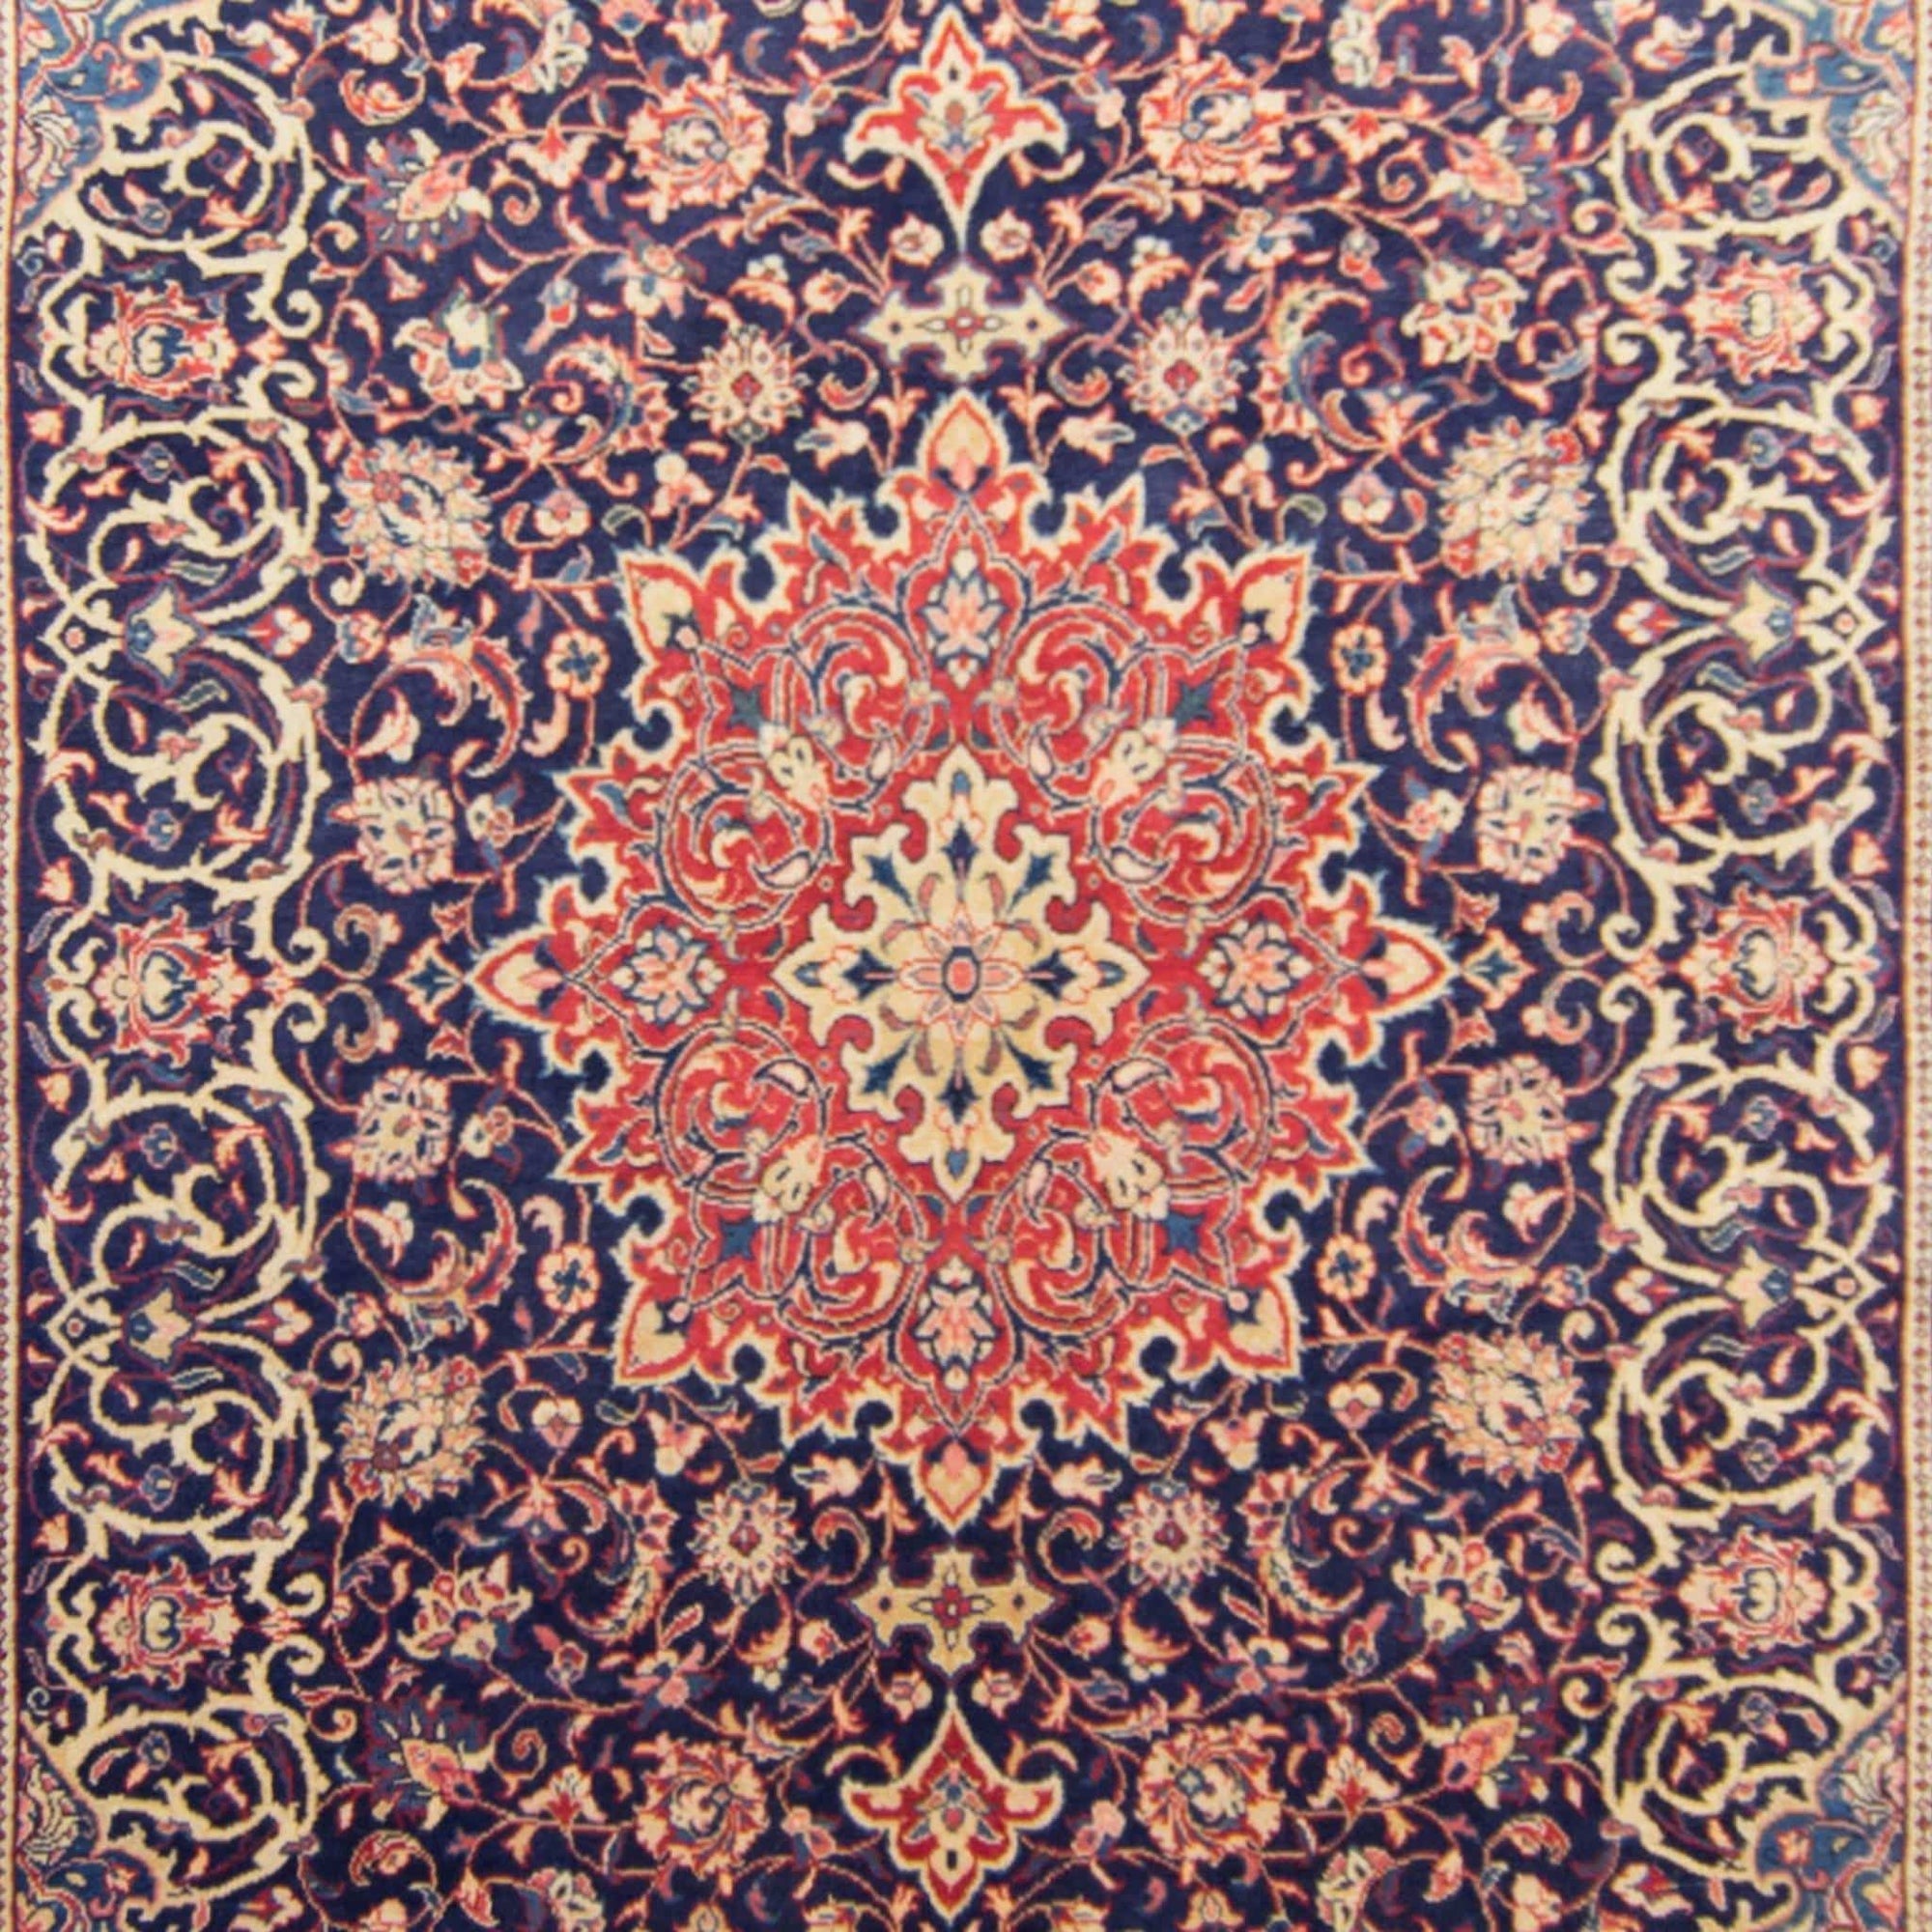 Fine Hand-knotted Wool Mahabad Persian Rug 294cm x 411cm